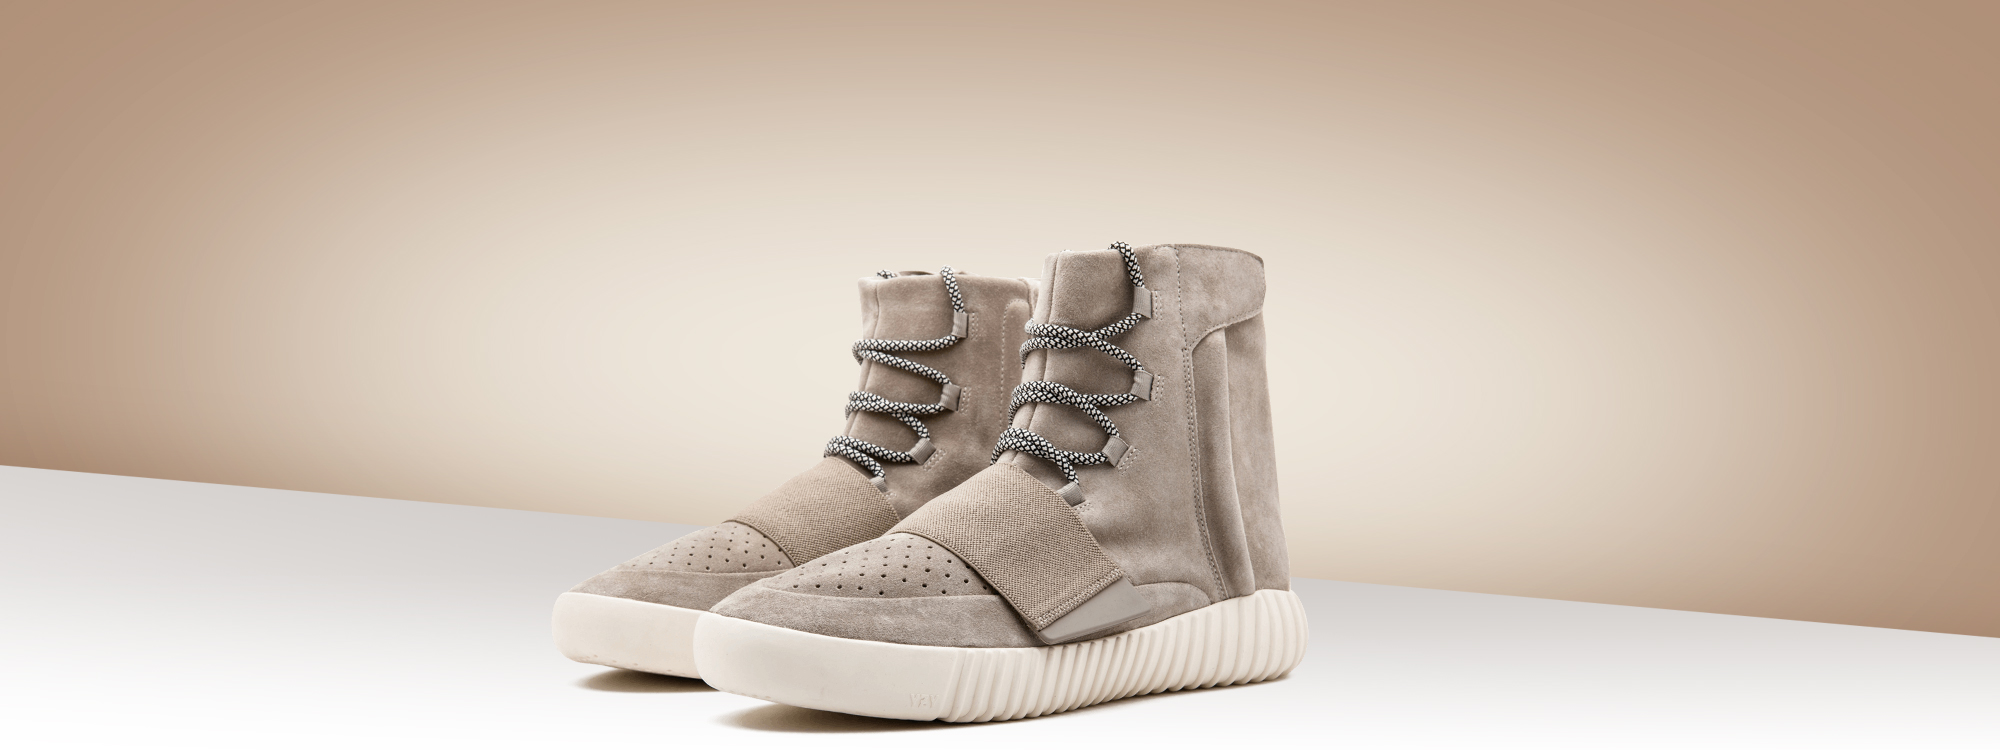  Yeezy Boost 750  Gray / White kids outfit